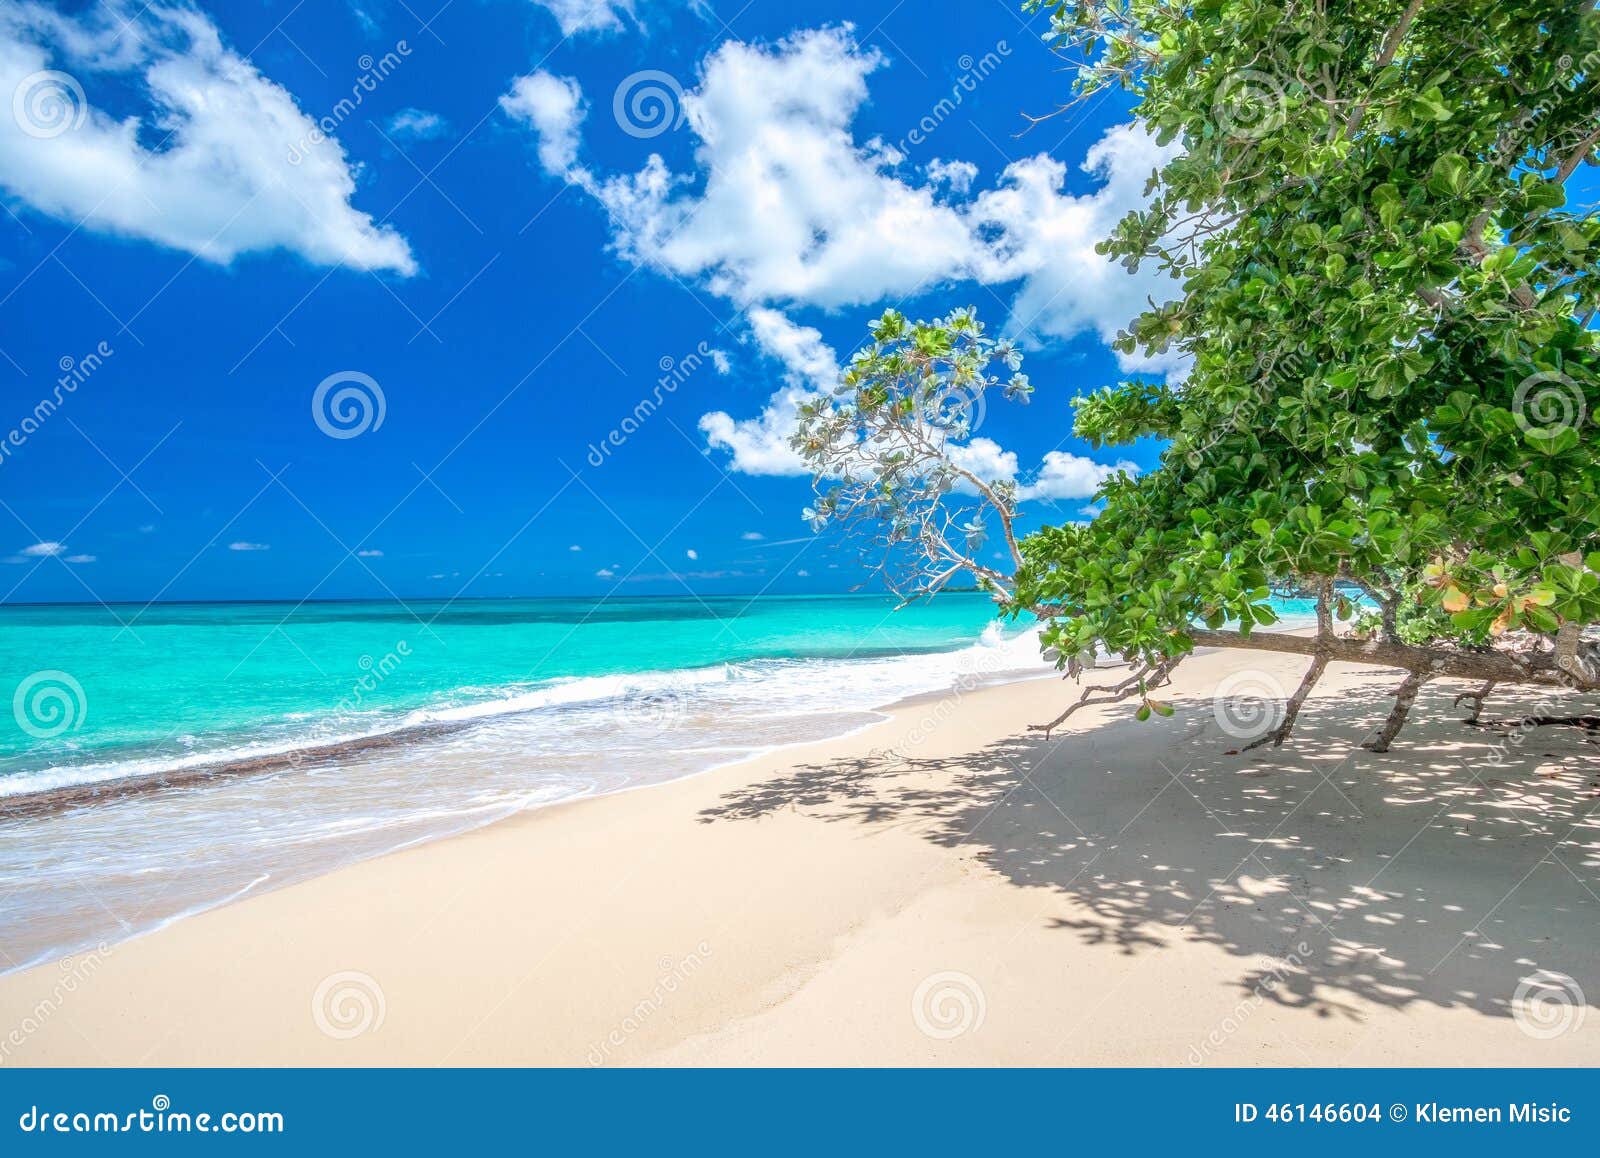 paradise beach playa rincon, considered one of the 10 top beaches in caribbean, dominican republic